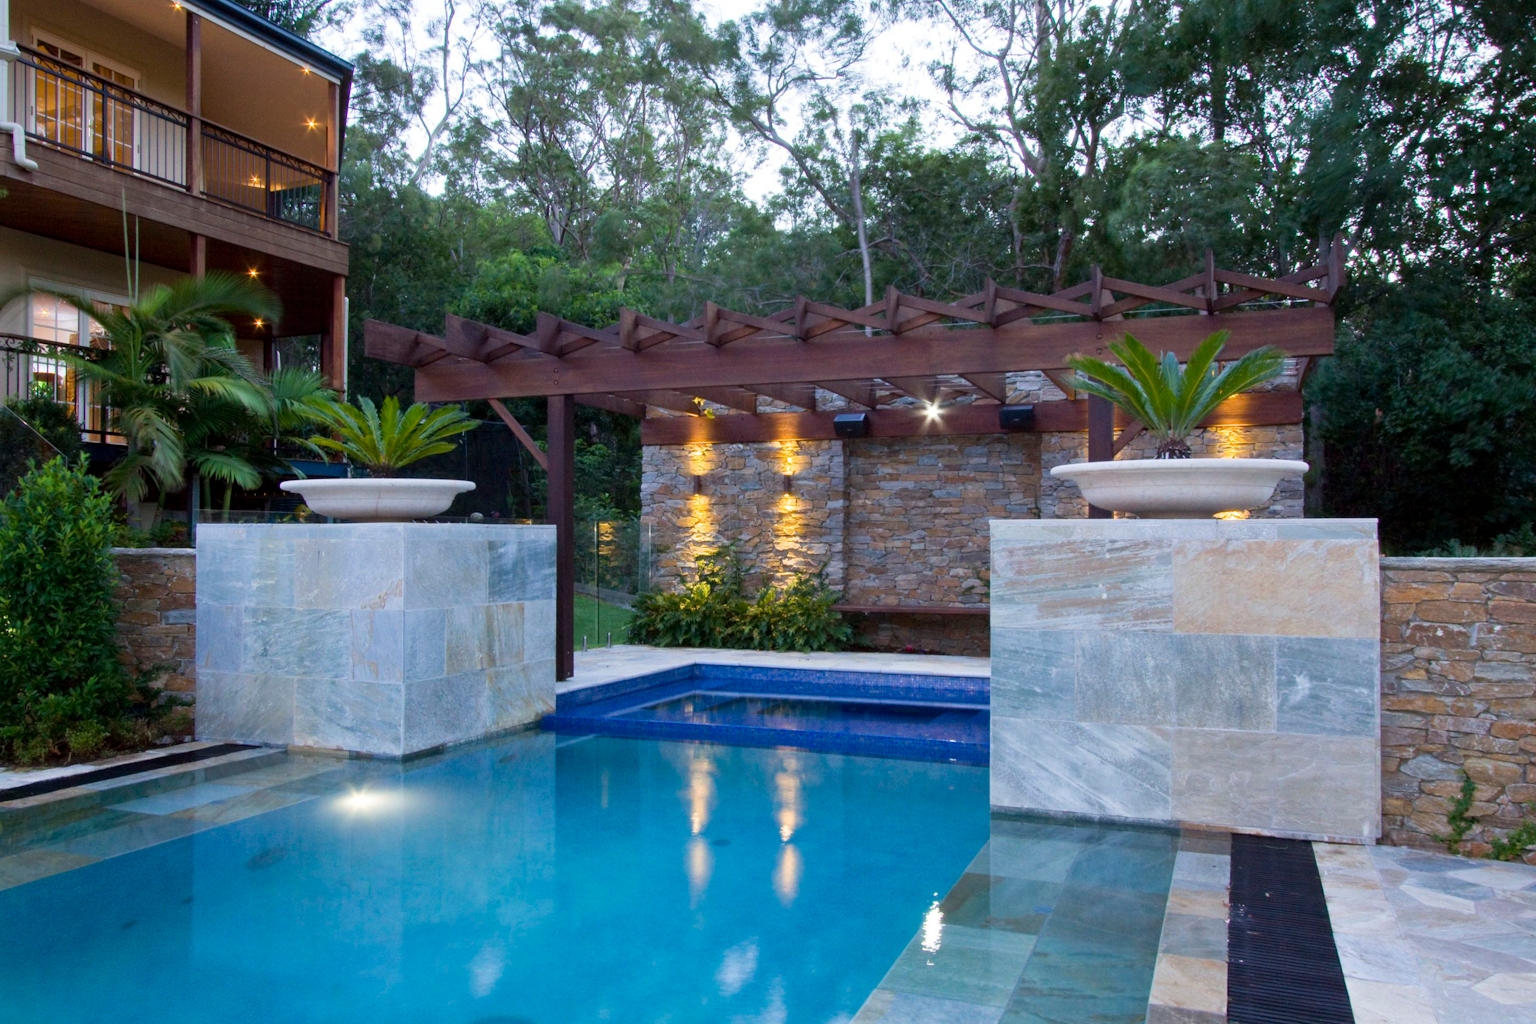 Cobb & Co split stone pavers and Mitta Mitta dry stone used as walling features